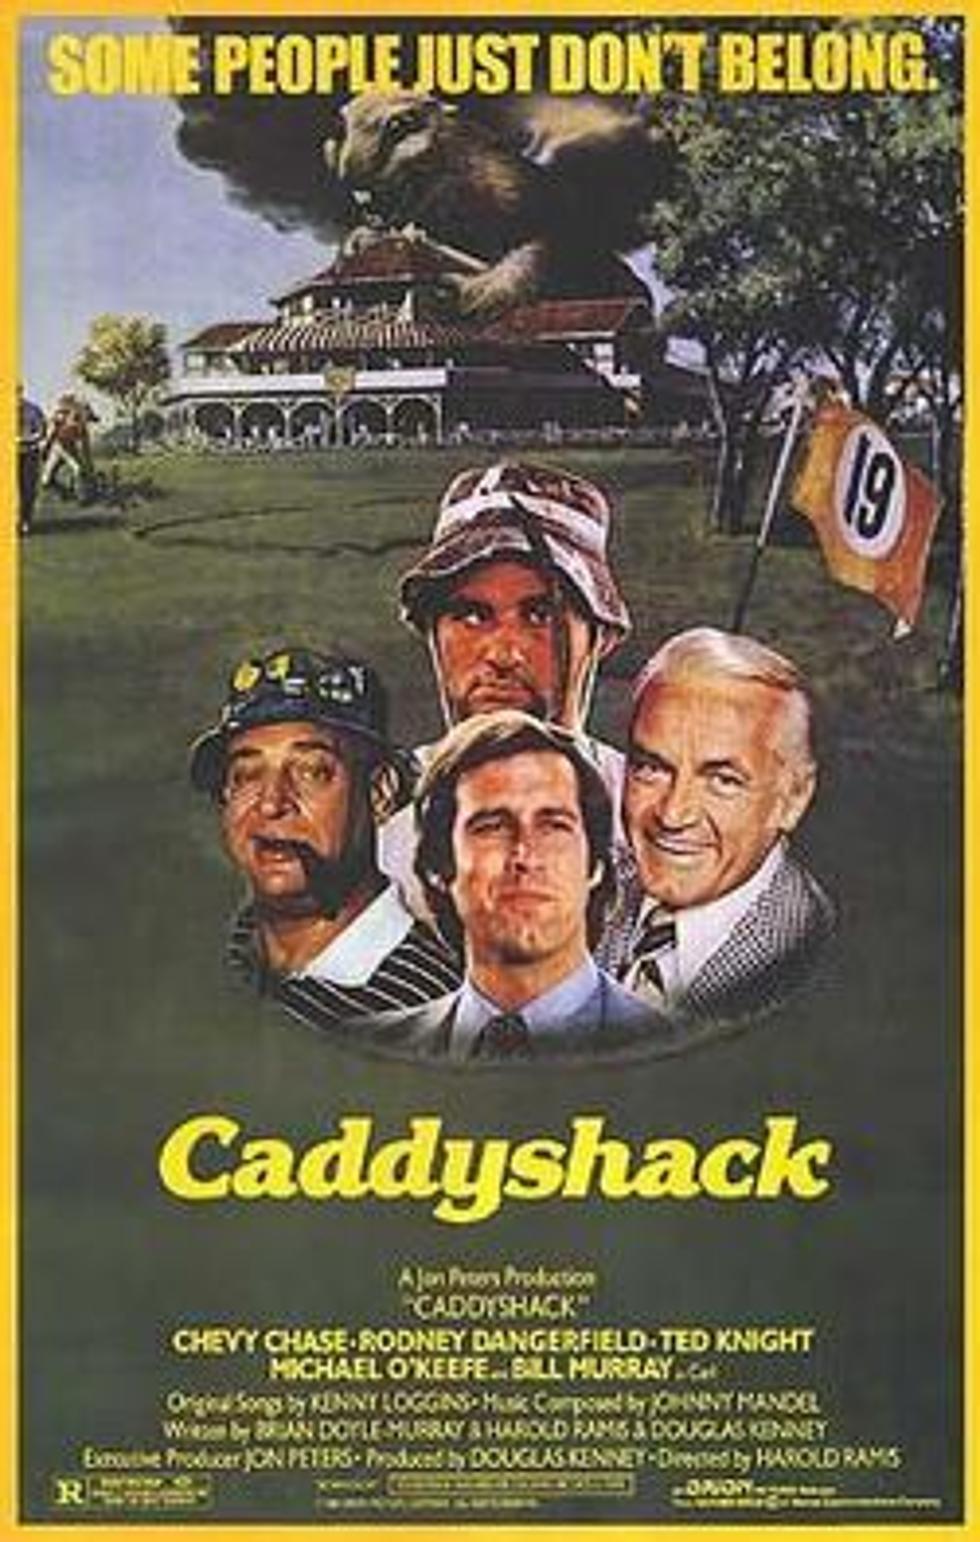 JULY 25, 1980: Caddyshack was Released in Theatres